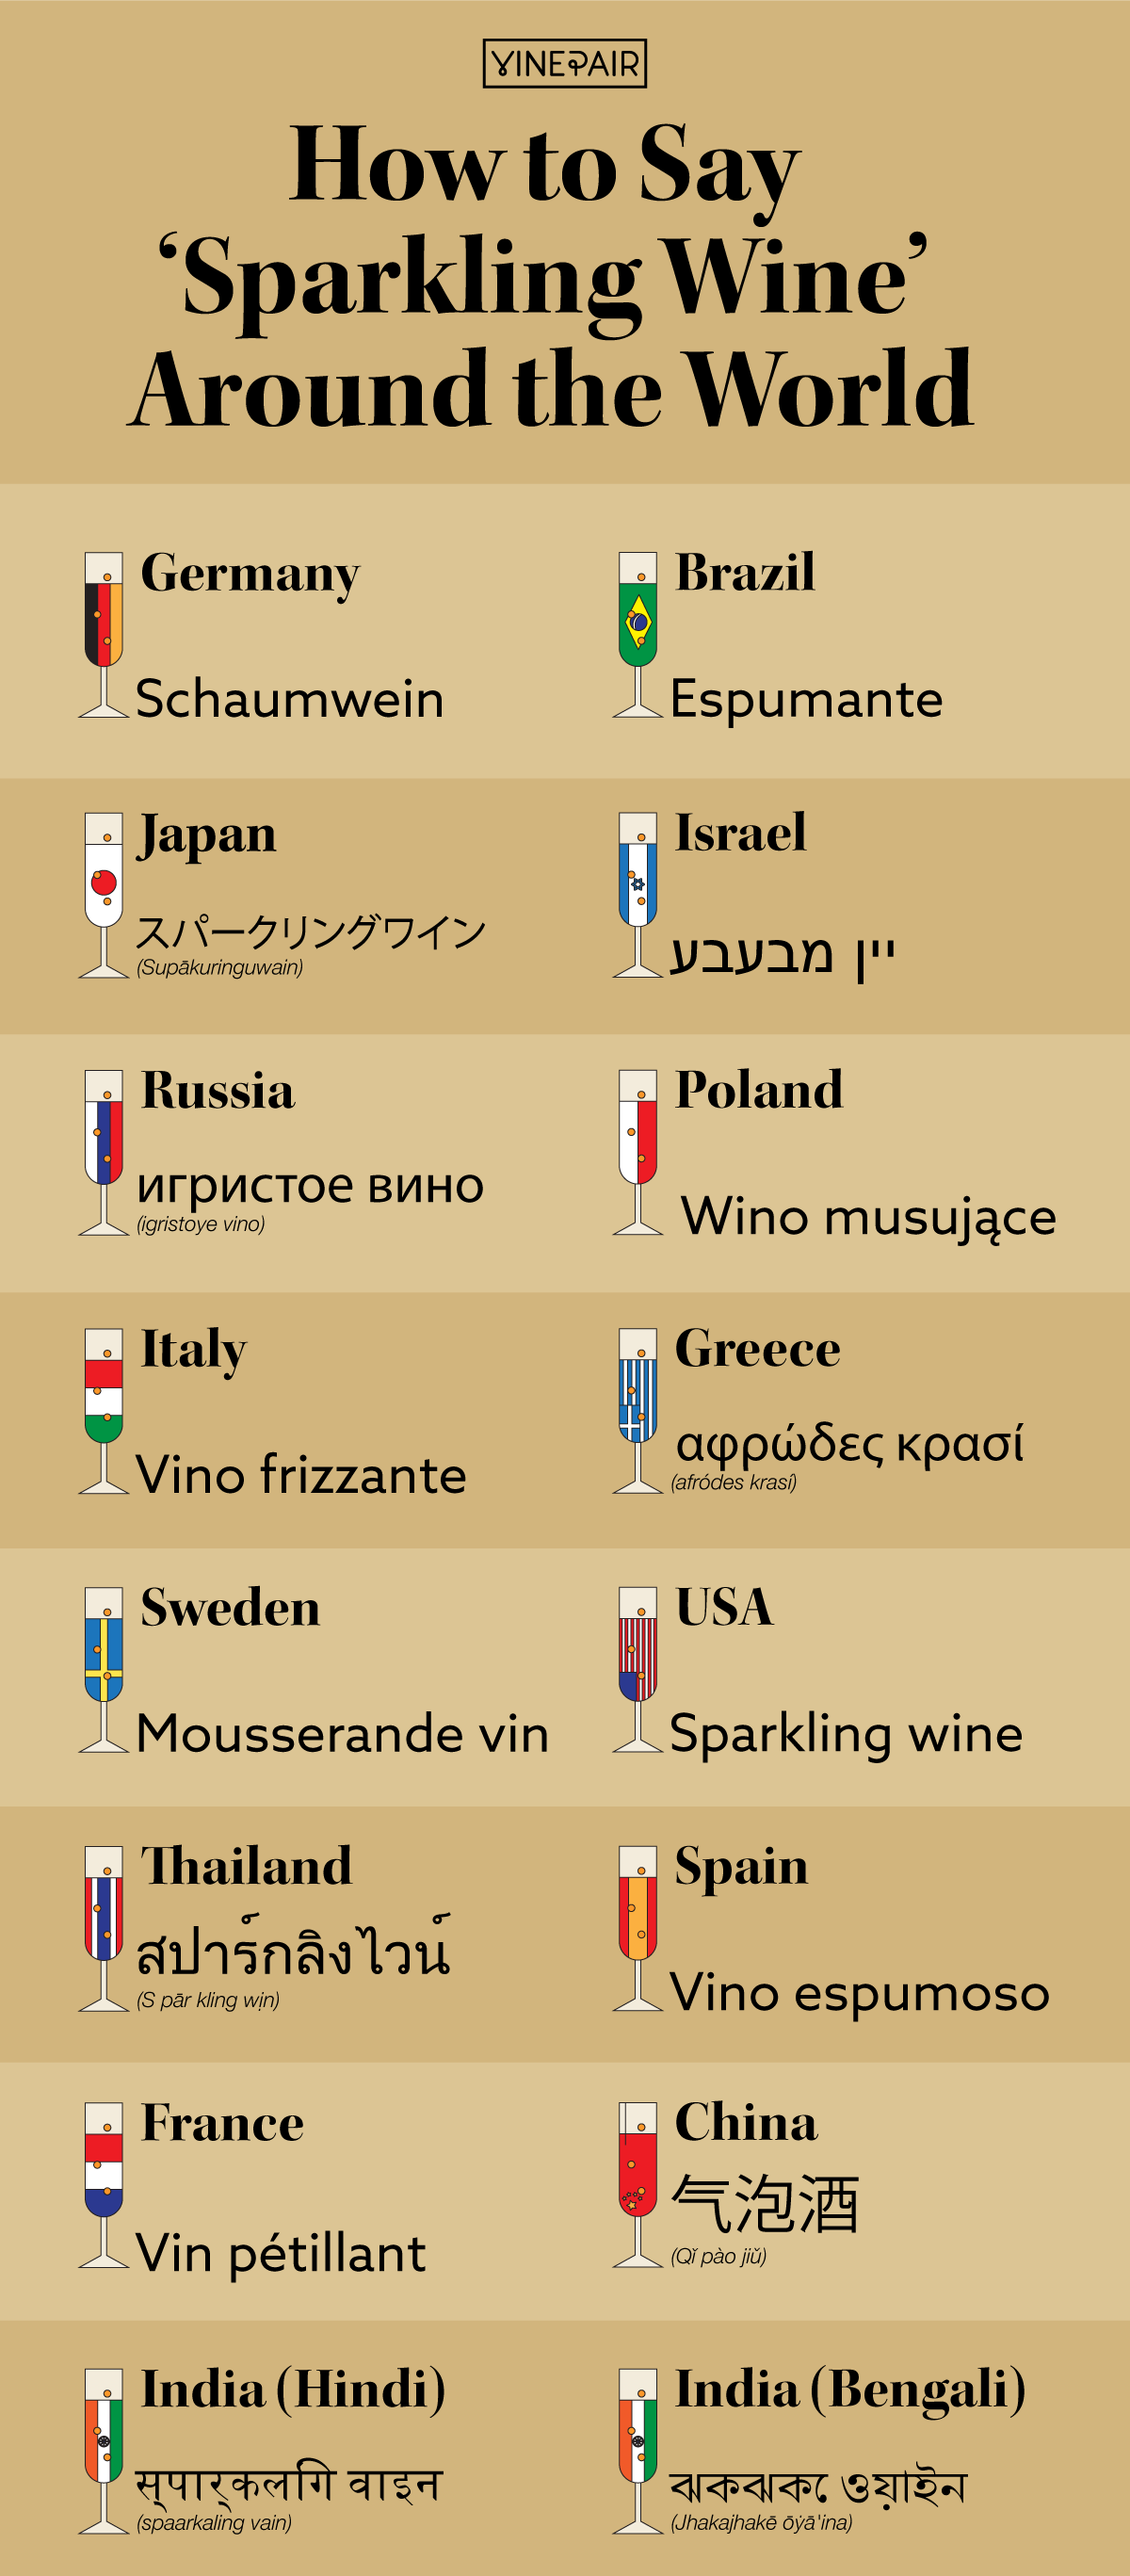 [Infographic] All the Ways to Say 'Sparkling Wine' Around the World